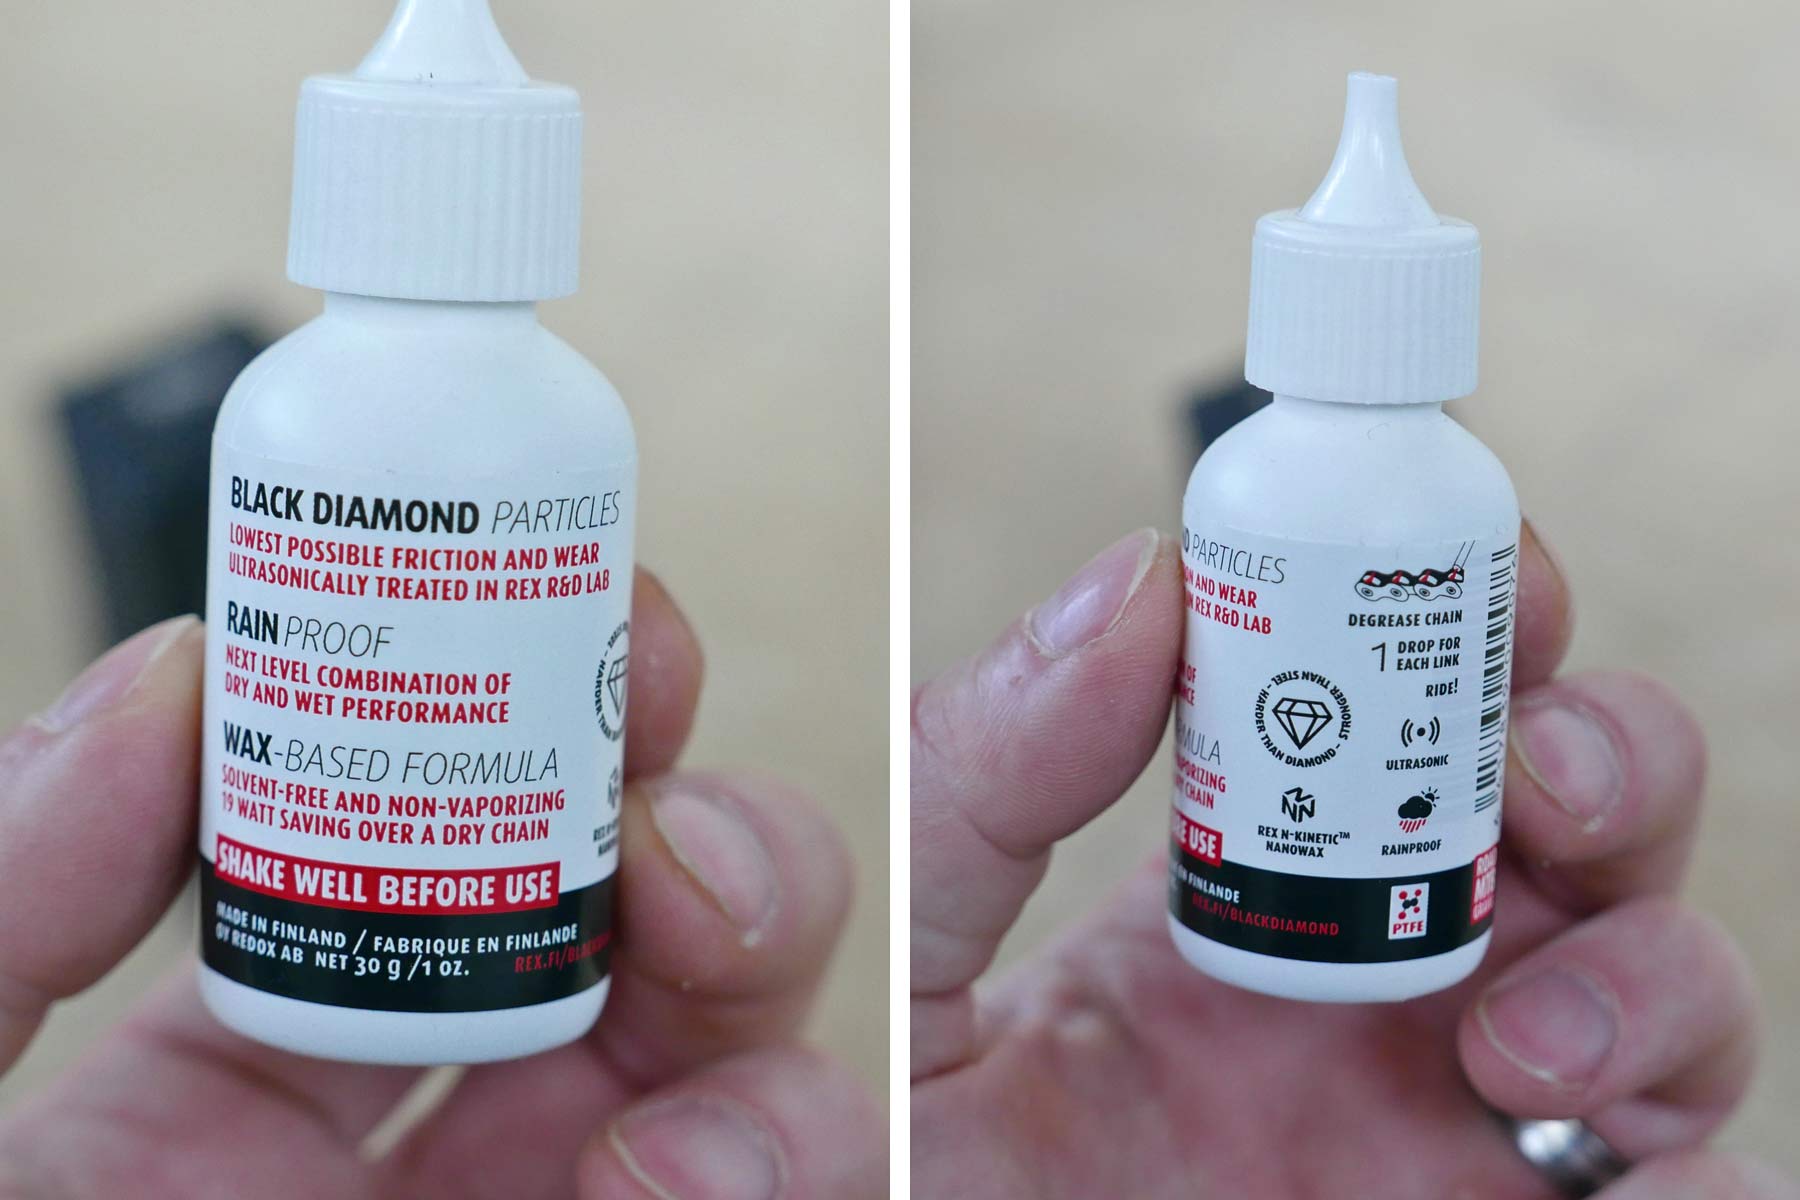 Rex Black Diamond lube, paraffin wax-based nanotech fastest ever bicycle chain lube